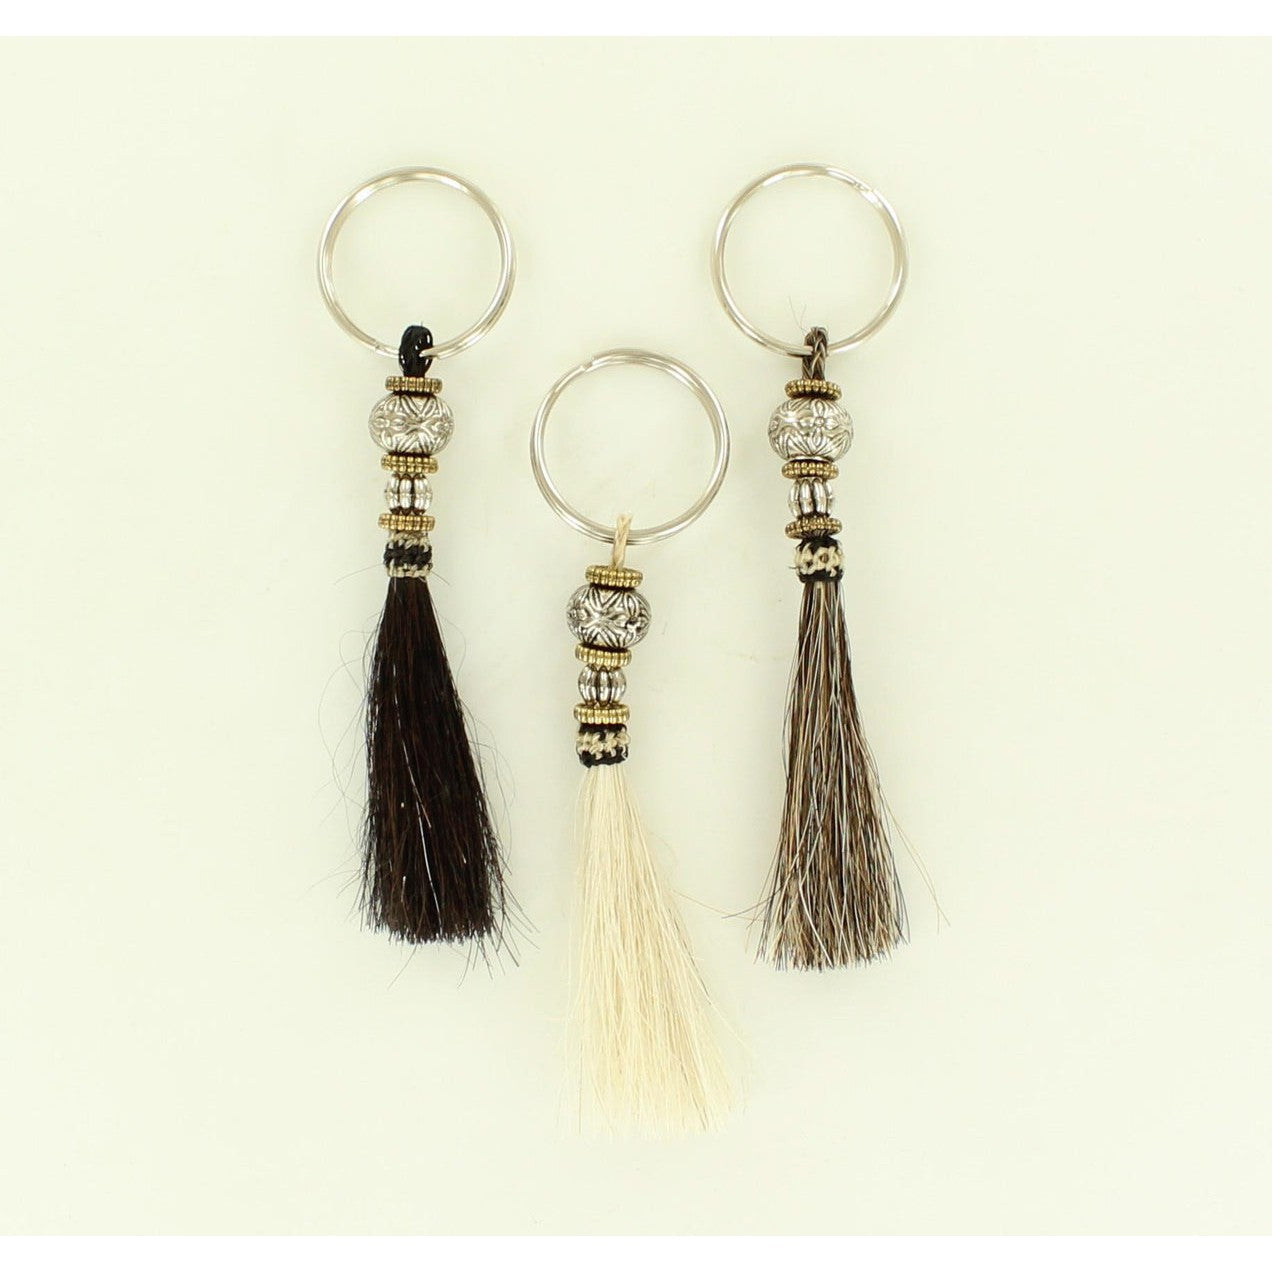 Double S 100% Horsehair Keychain w/Beads - Assorted